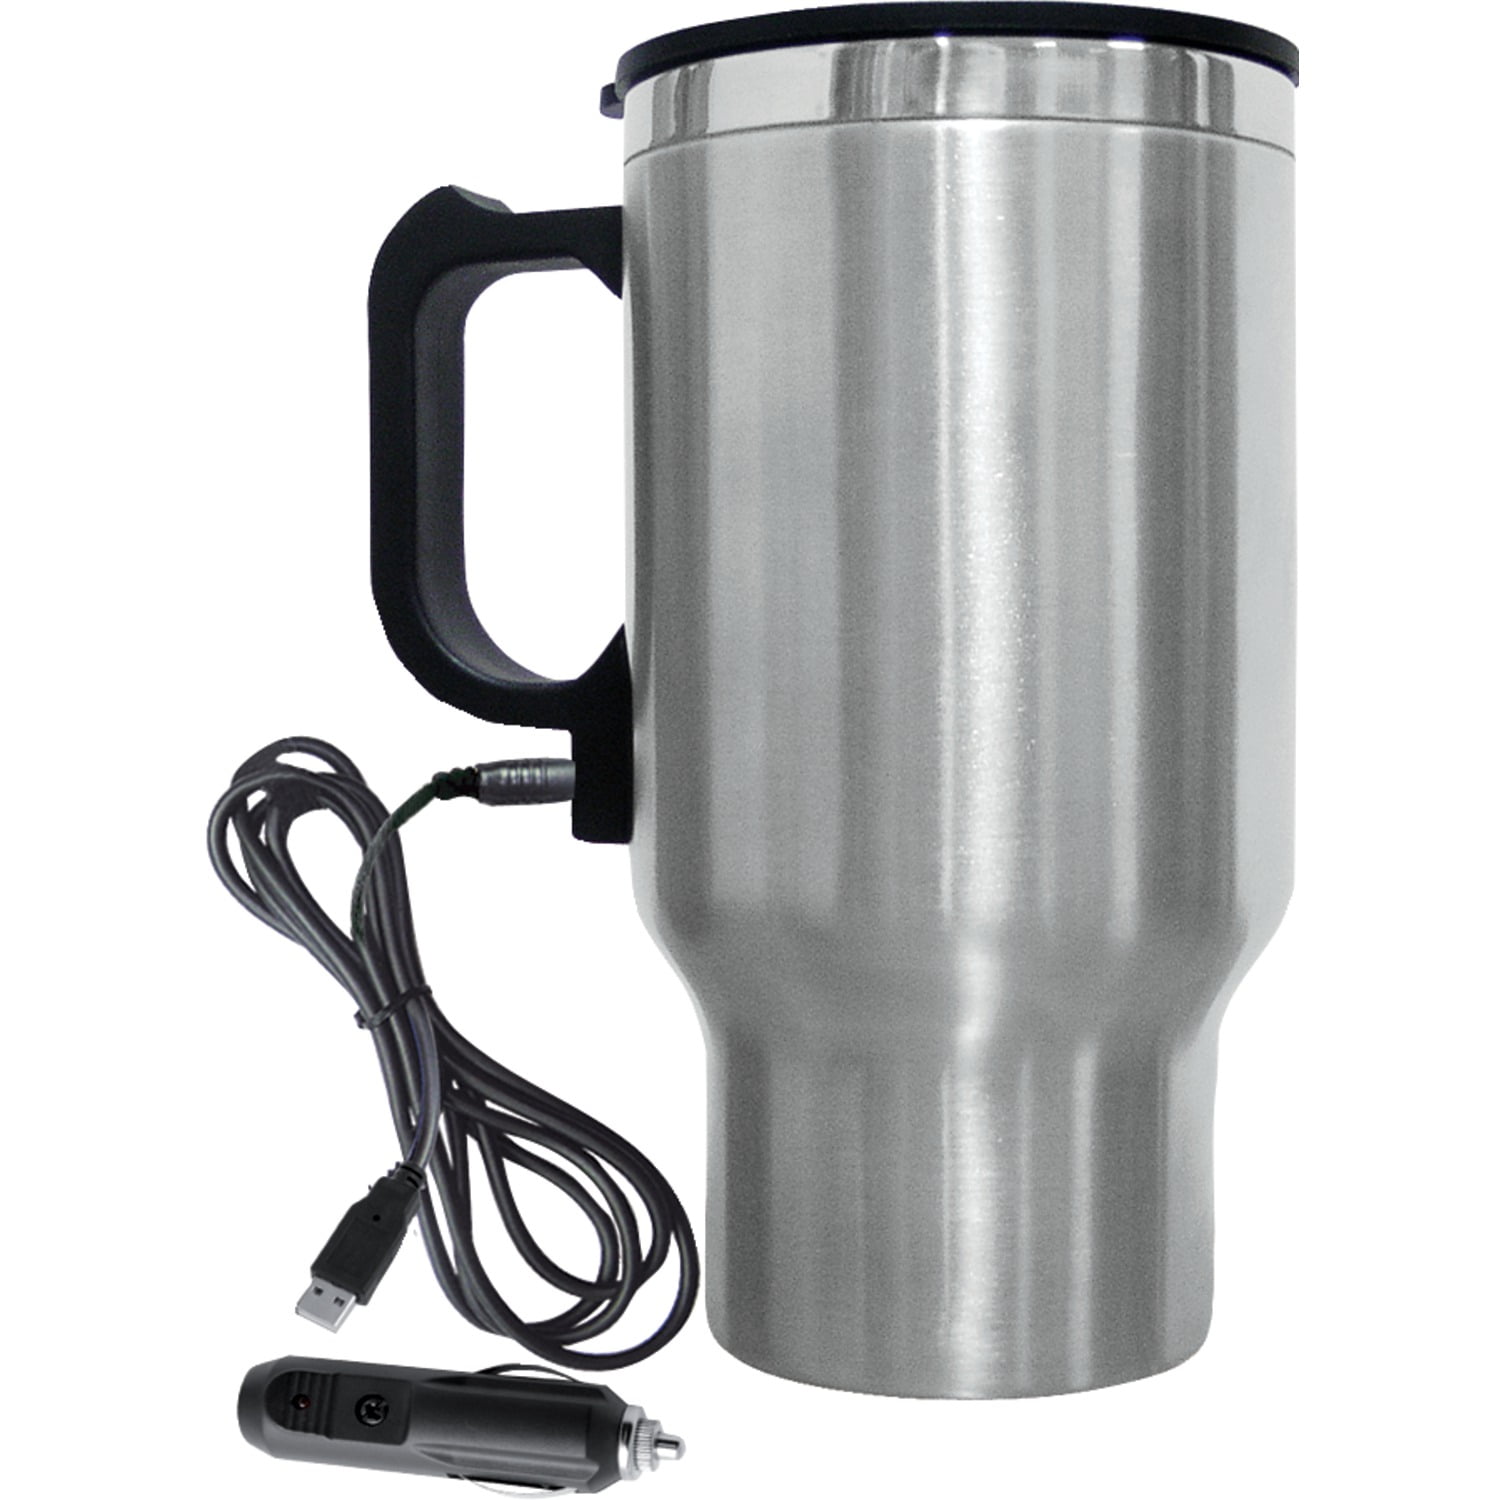 Discount Travel Mugs – Stainless Steel Travel Mugs Wholesale